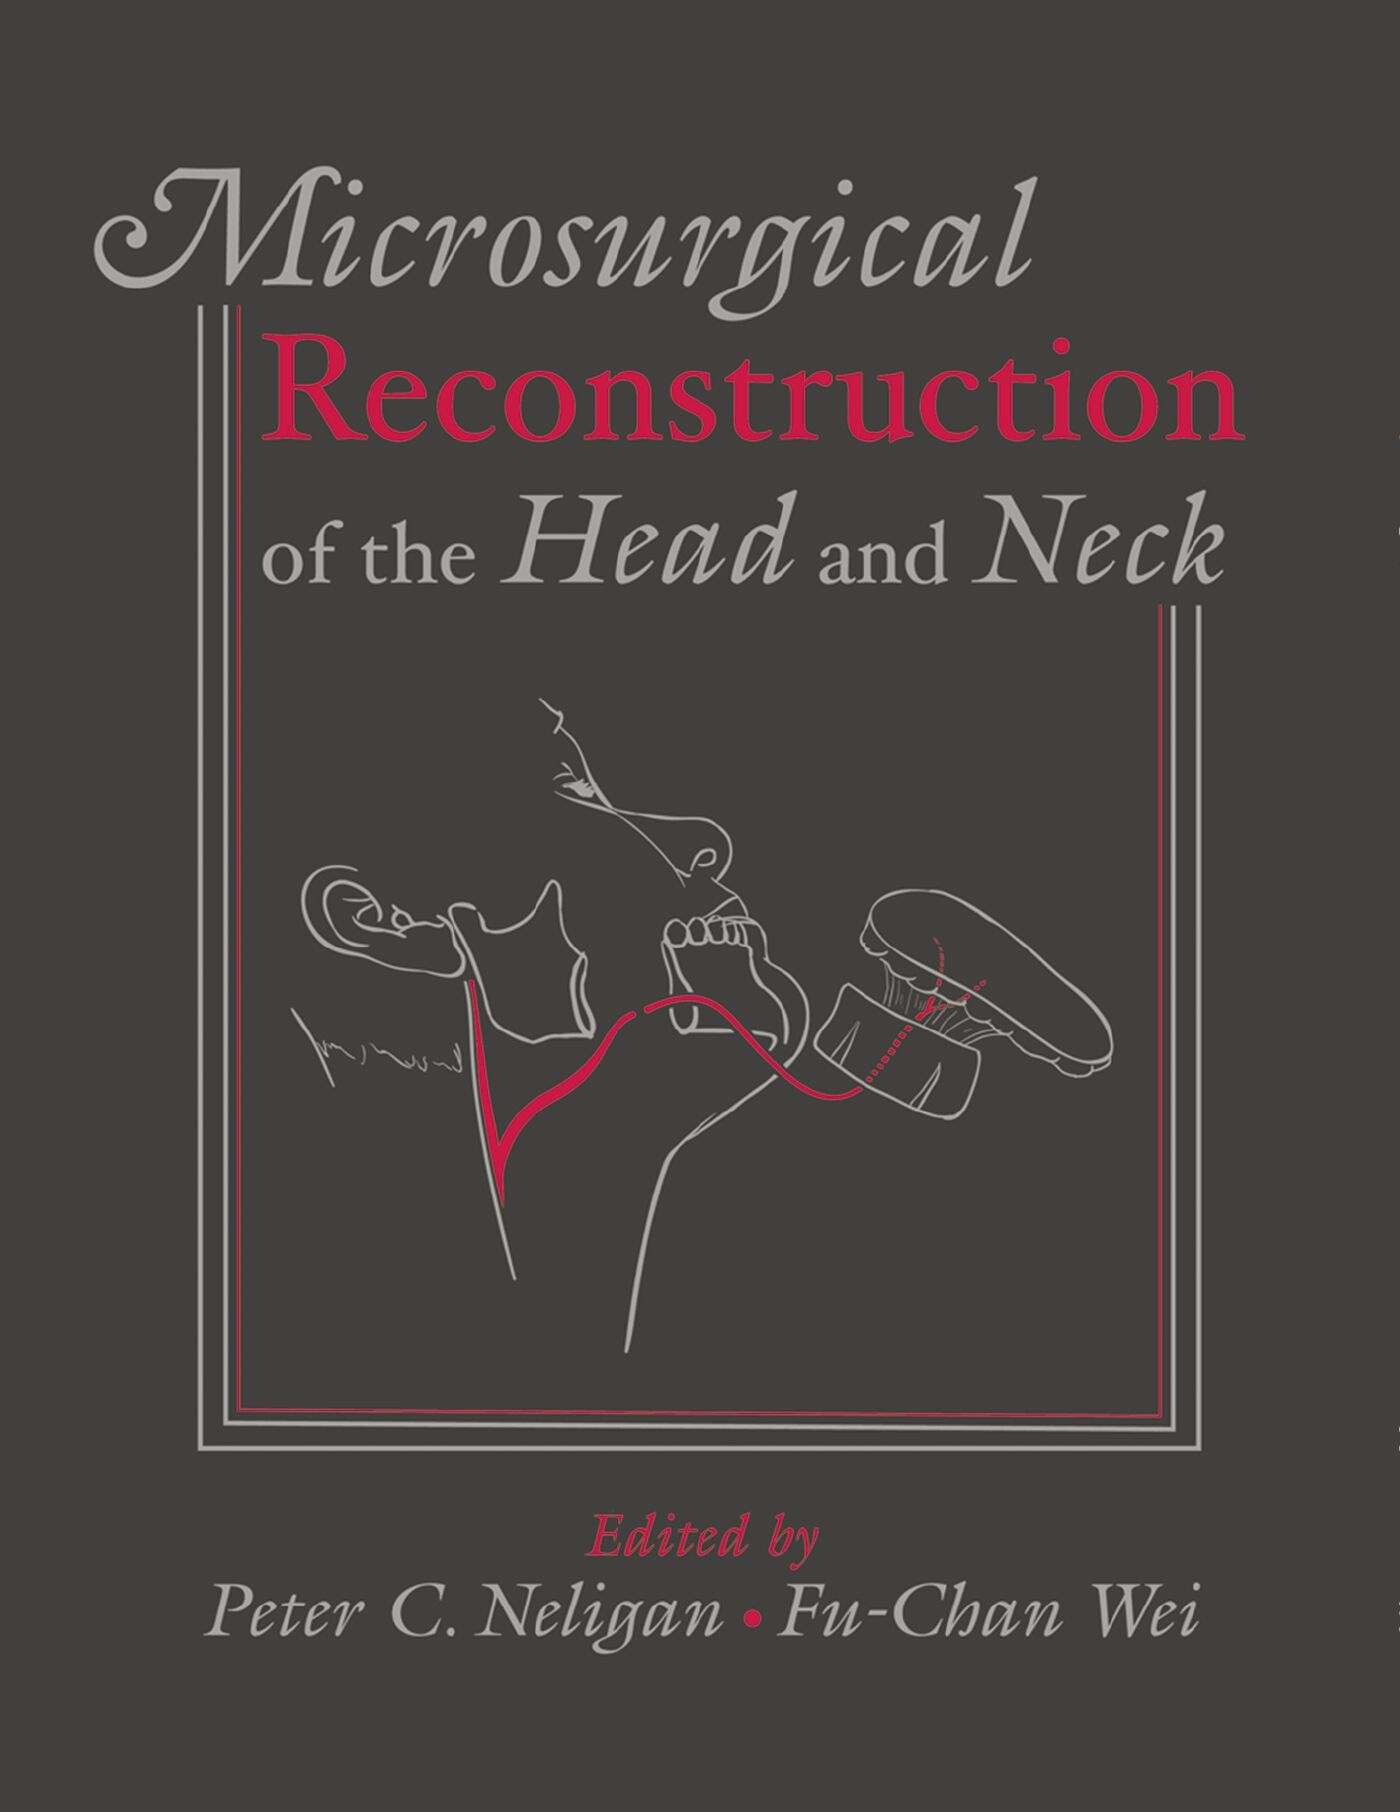 Microsurgical Reconstruction of the Head and Neck, 9781626236738